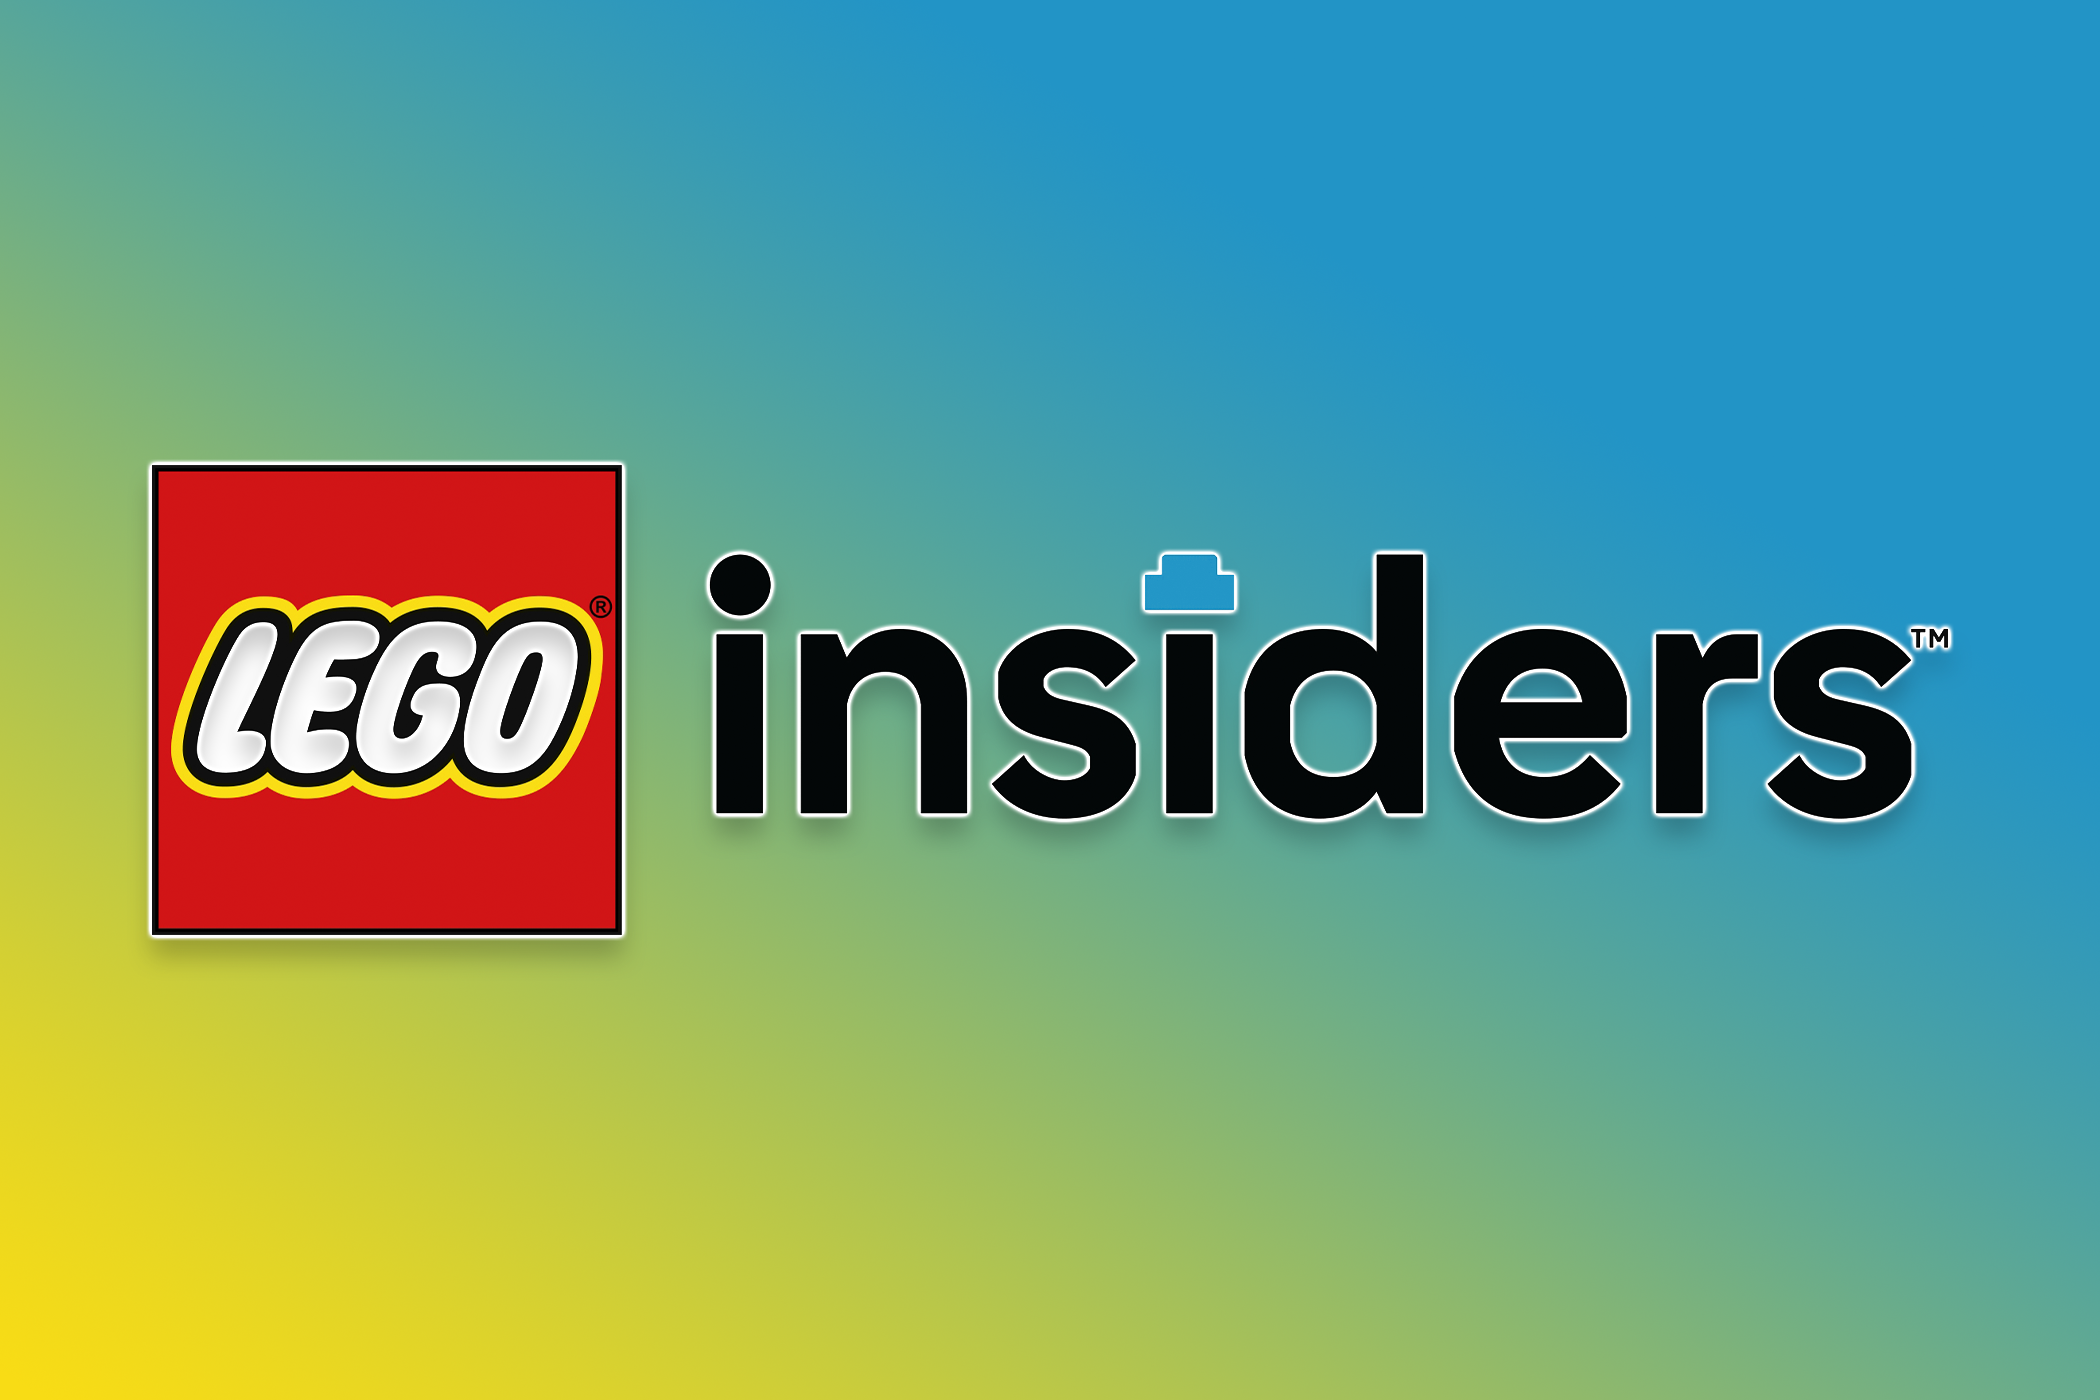 #Lego VIP Is Now Lego Insiders: Here’s What Changed